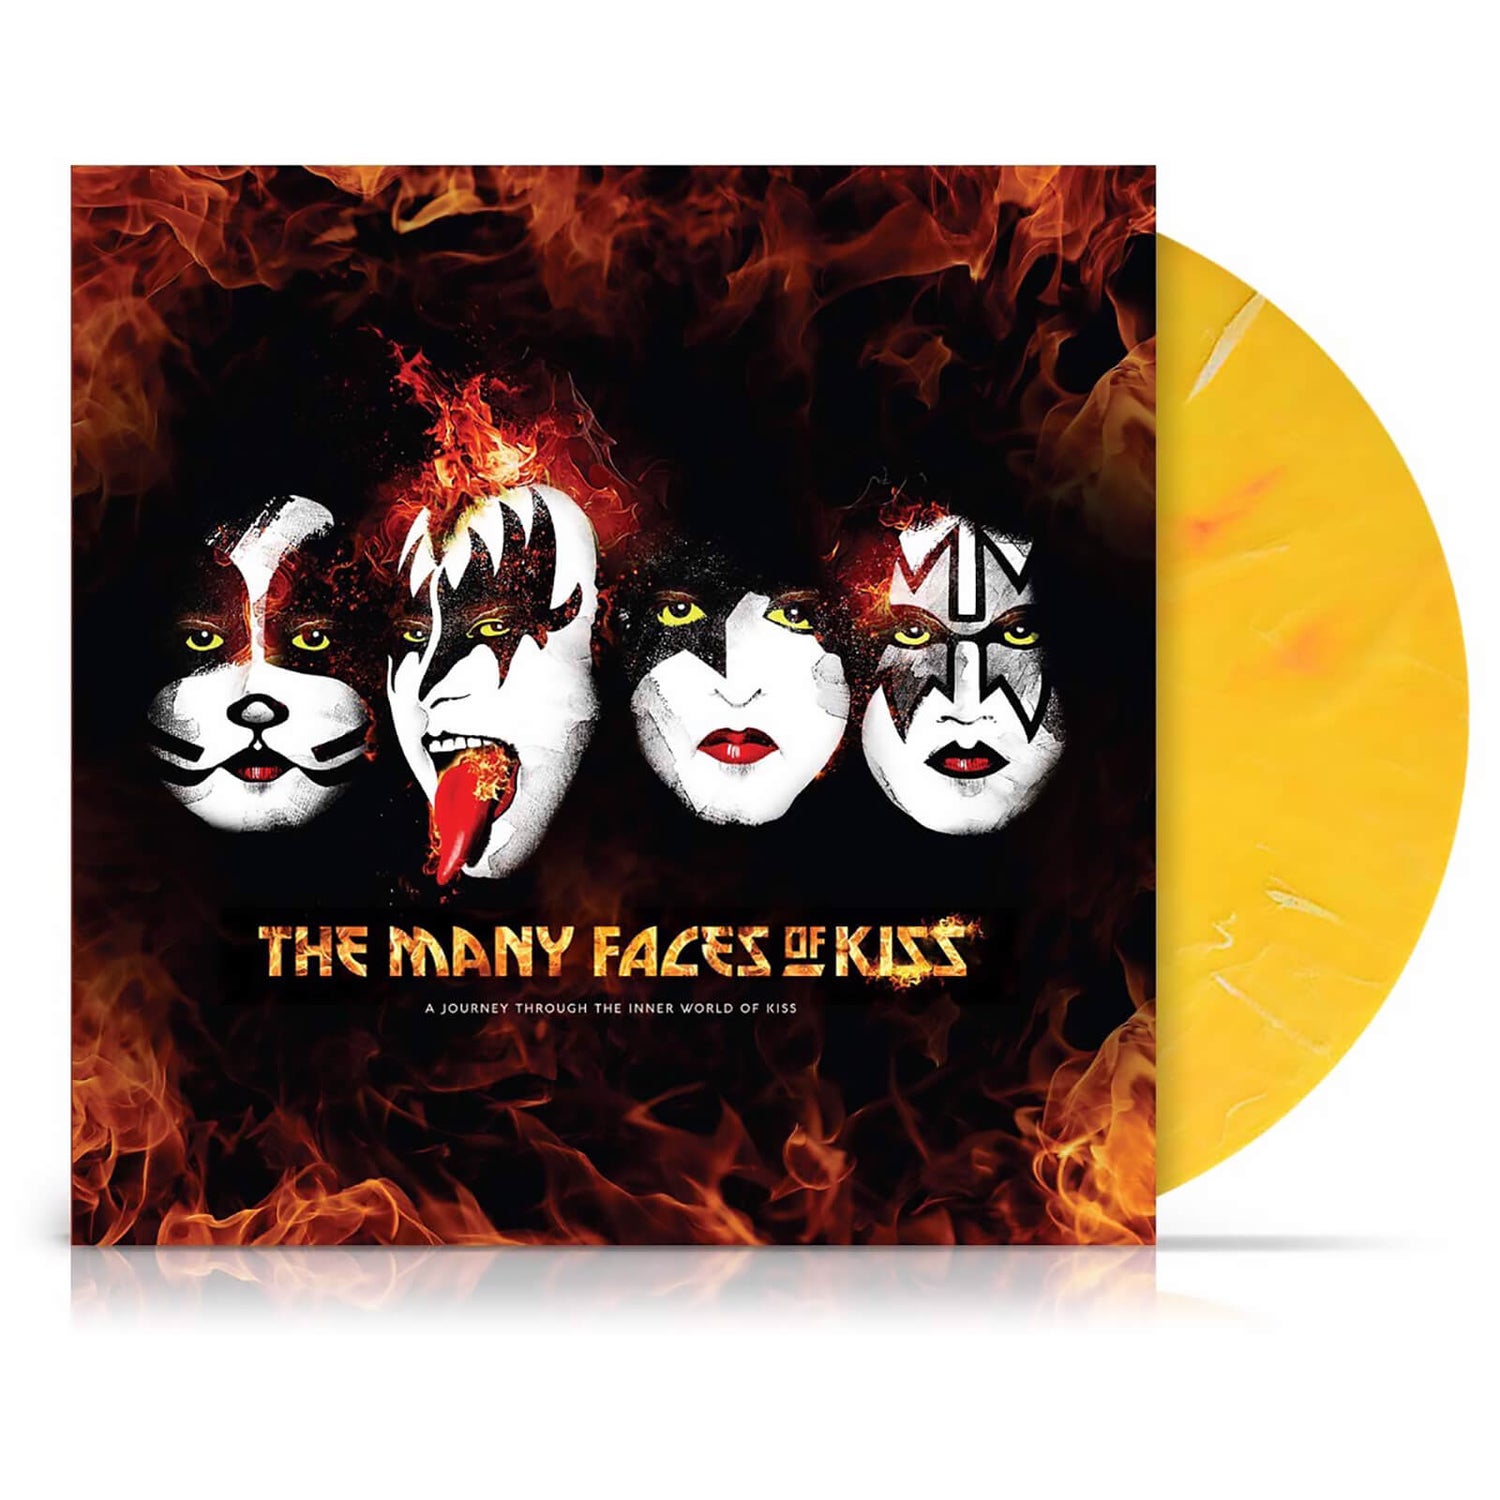 The Many Faces Of Kiss (Limited Yellow Splatter Vinyl)